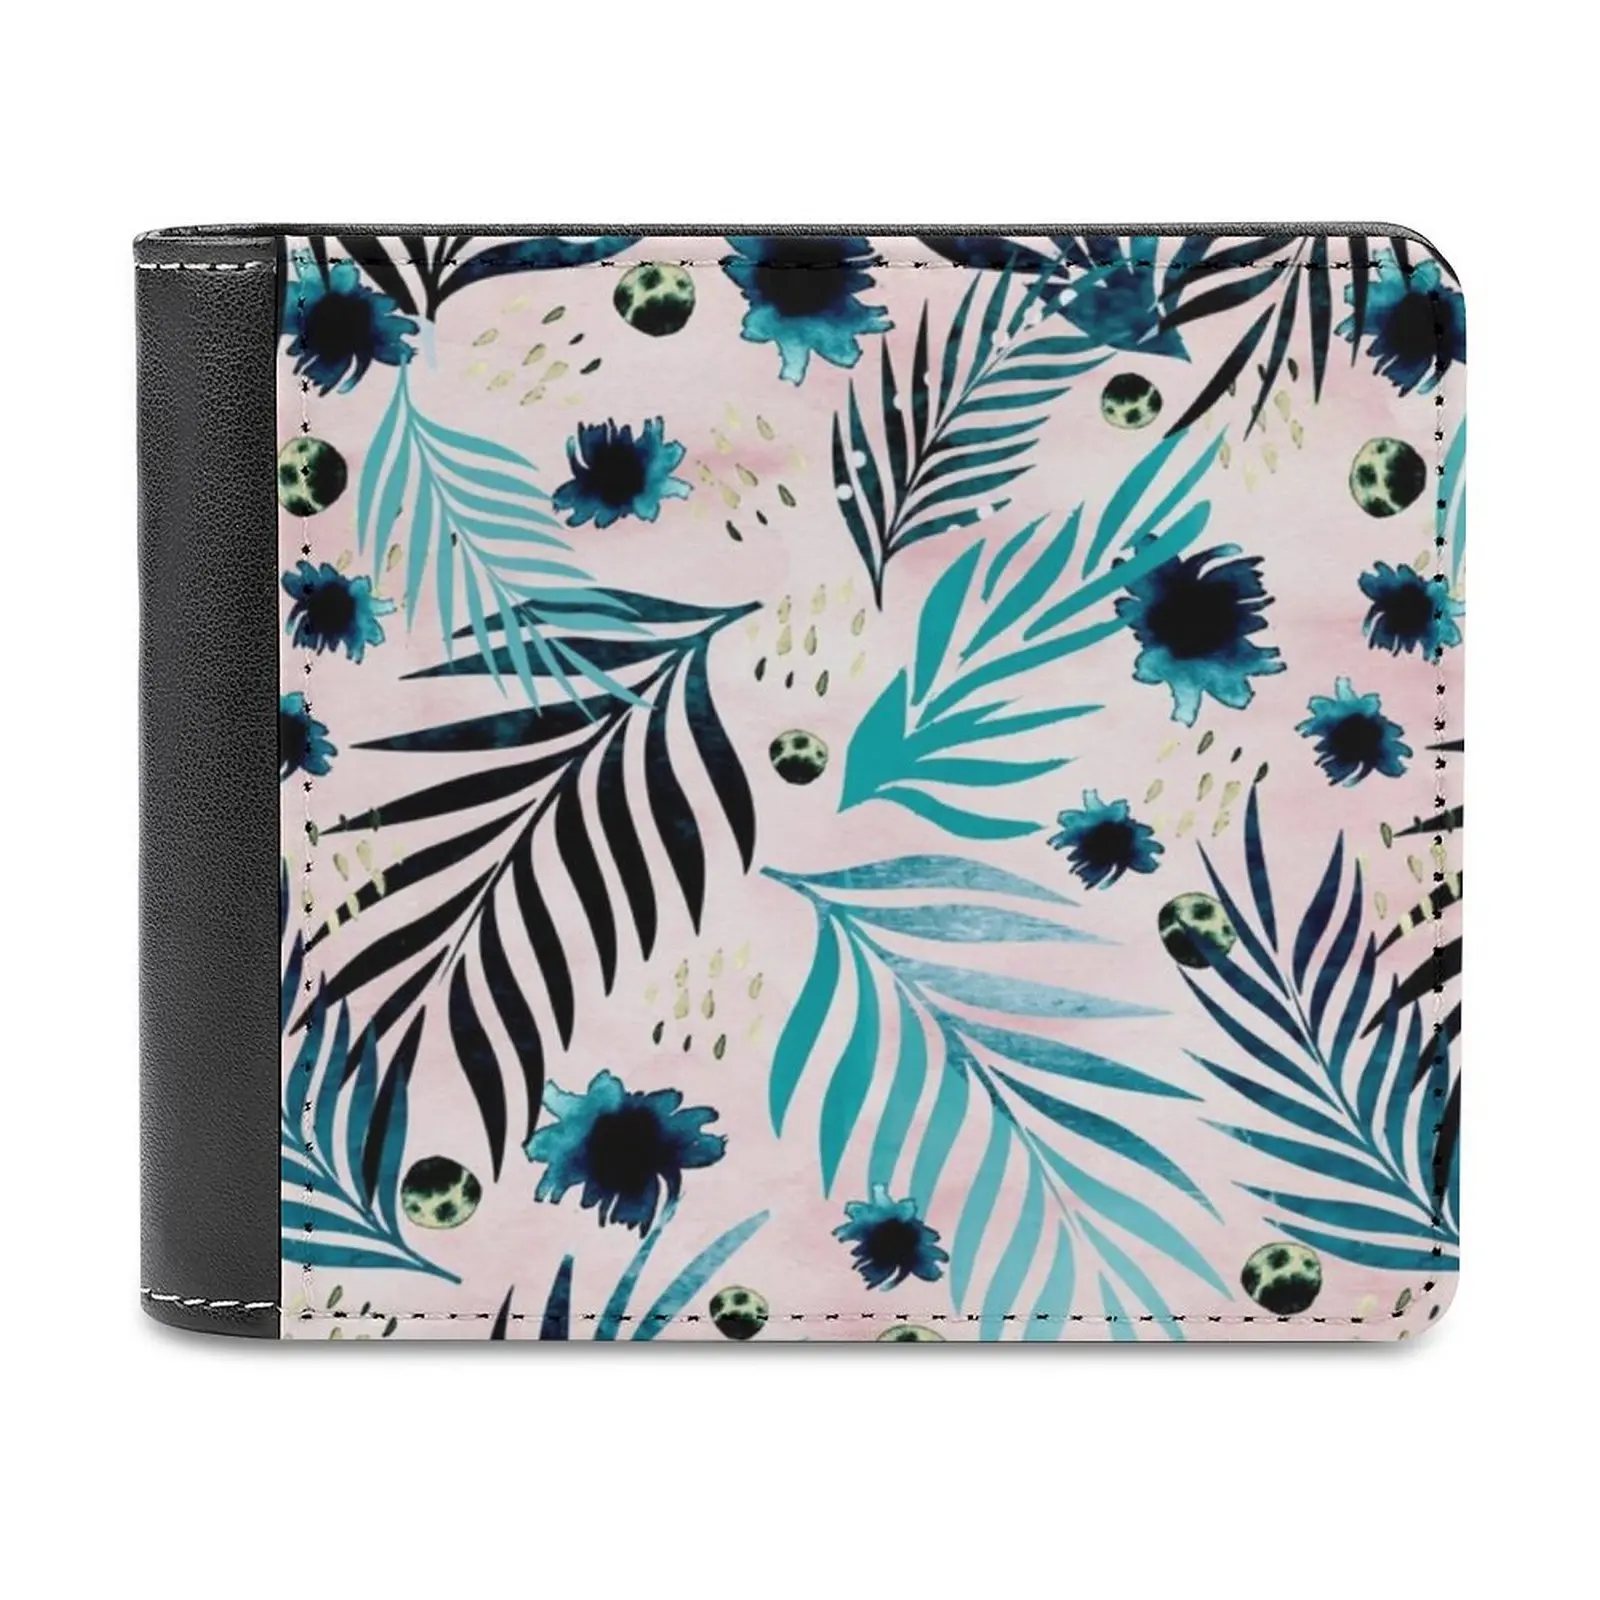 

Summertime Business Men Wallets Small Money Purses New Design Dollar Price Top Wallet Leaves Palms Tropical Summer Watercolor